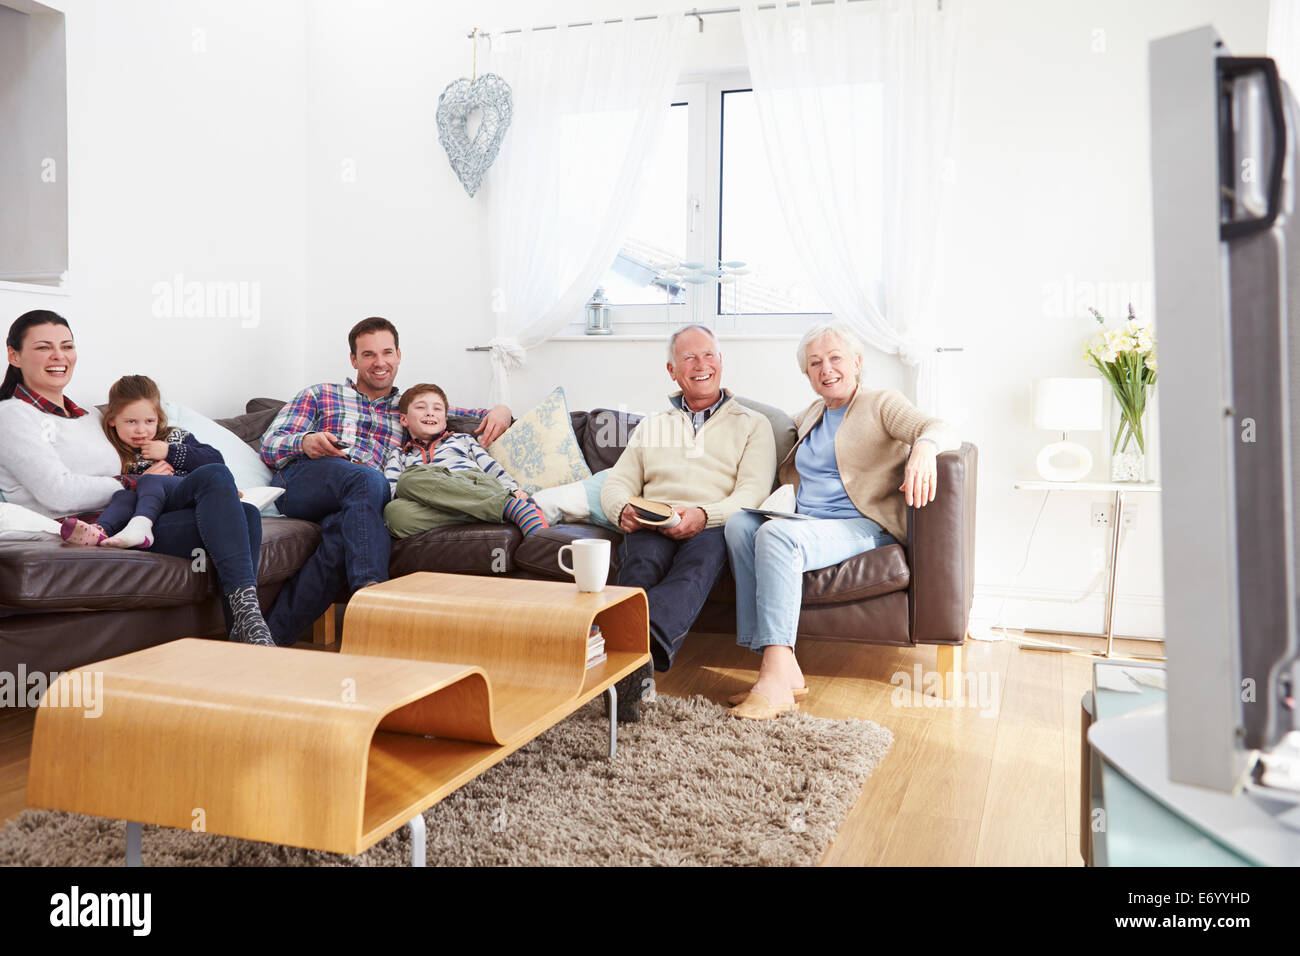 Multi Generation Family Watching TV Together Stock Photo